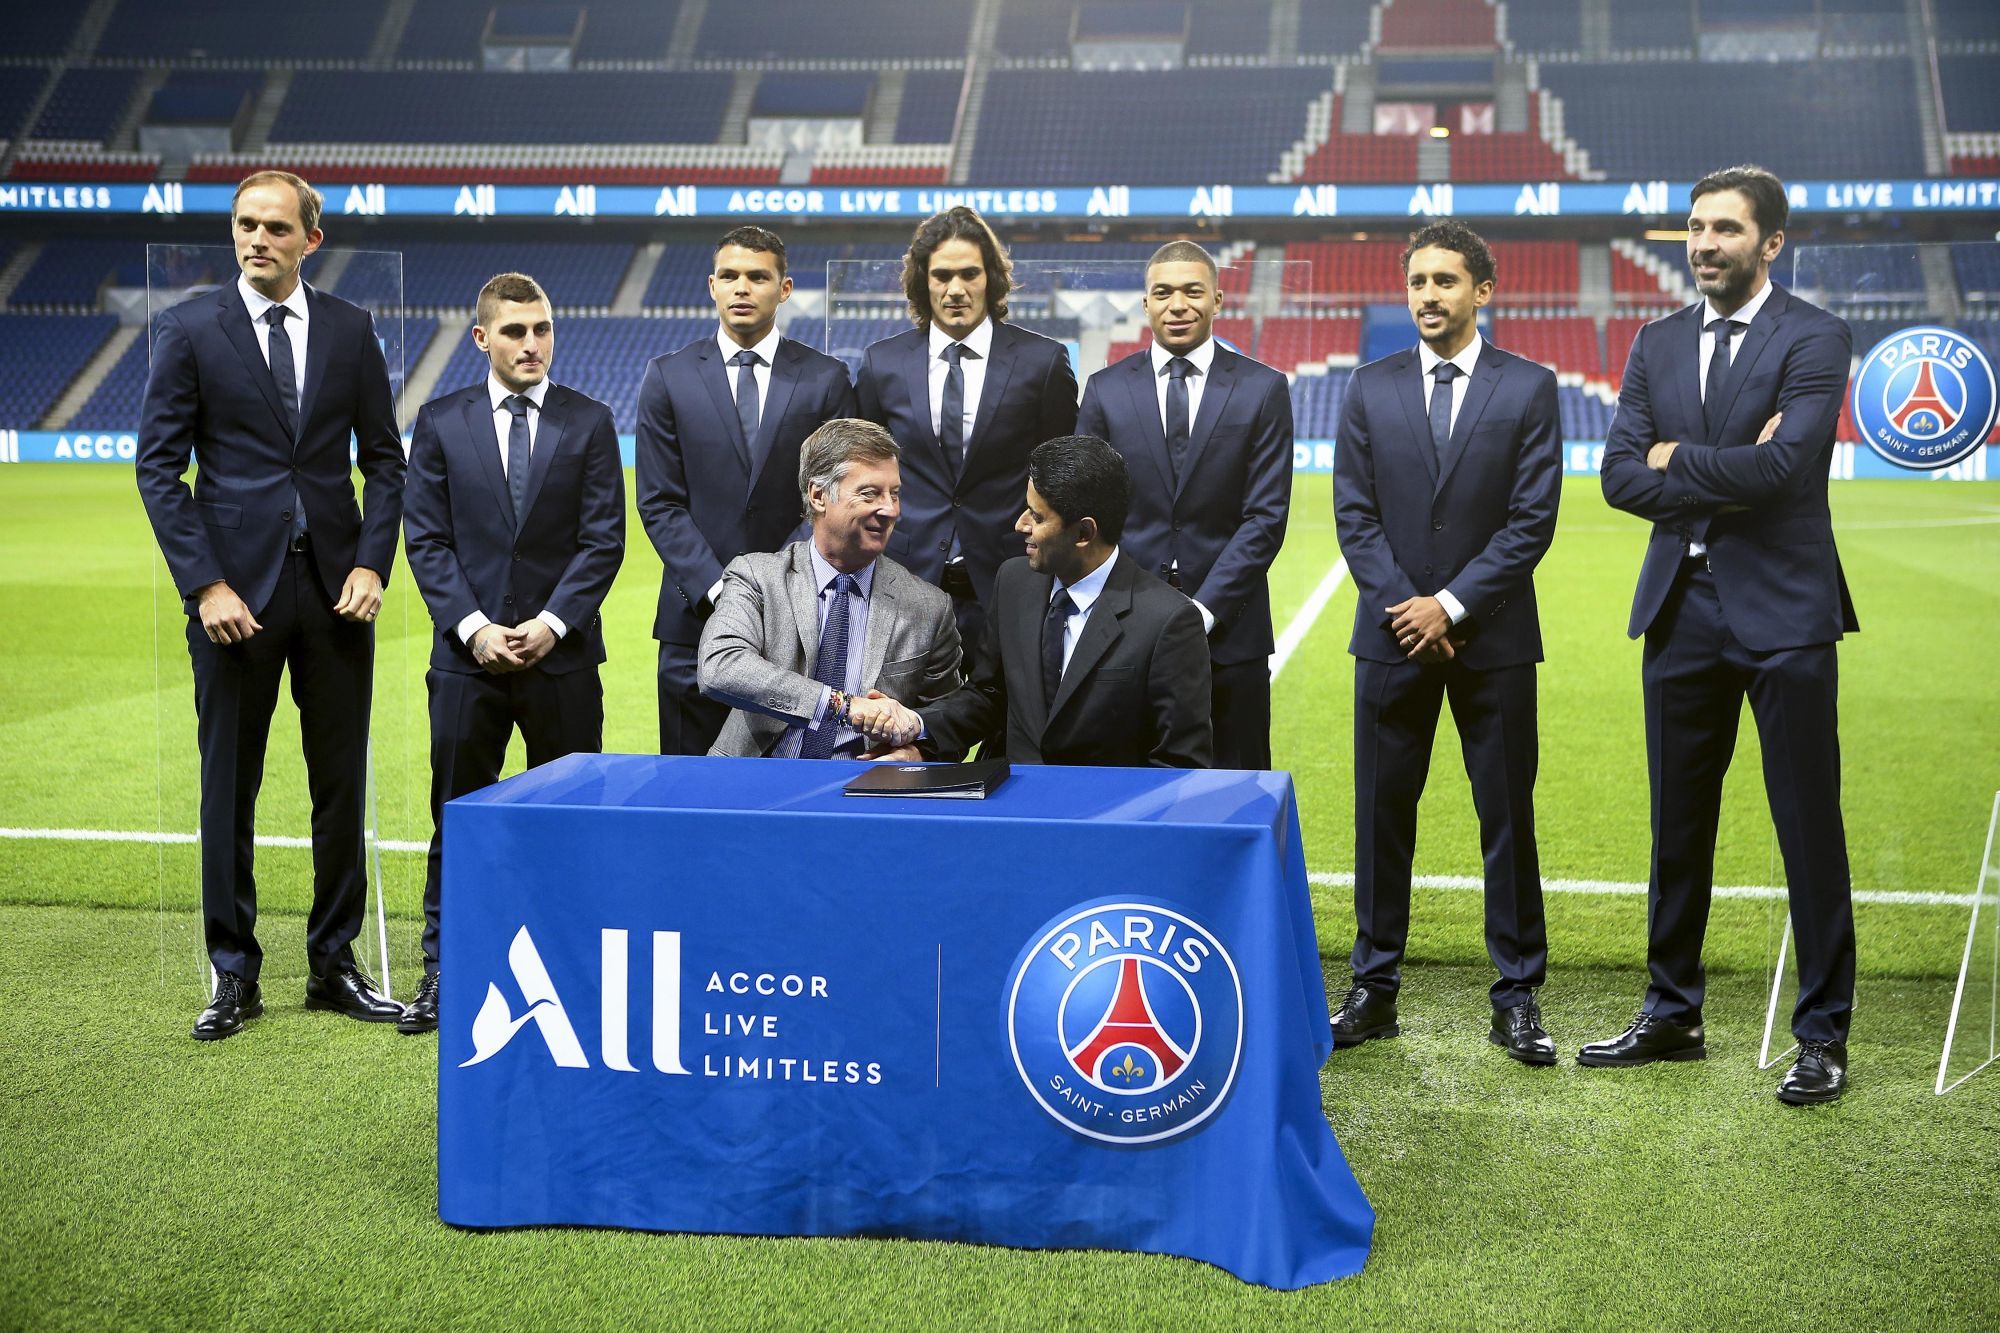 Thomas Tuchel trainer of Paris Saint Germain, Marco Verratti of Paris Saint Germain , Thiago Silva of Paris Saint Germain , Edinson Cavani of Paris Saint Germain, Kylian Mbappe of Paris Saint Germain , Marquinhos of Paris Saint Germain, Gianluigi Buffon of Paris Saint Germain, Sebastien Bazin and Nasser Al Khelaifi during a Paris Saint Germain Press Conference to announce Accor Live Limitless  as new jersey sponsor on February 22, 2019 in Paris, France. (Photo by Pierre Costabadie/Icon Sport)